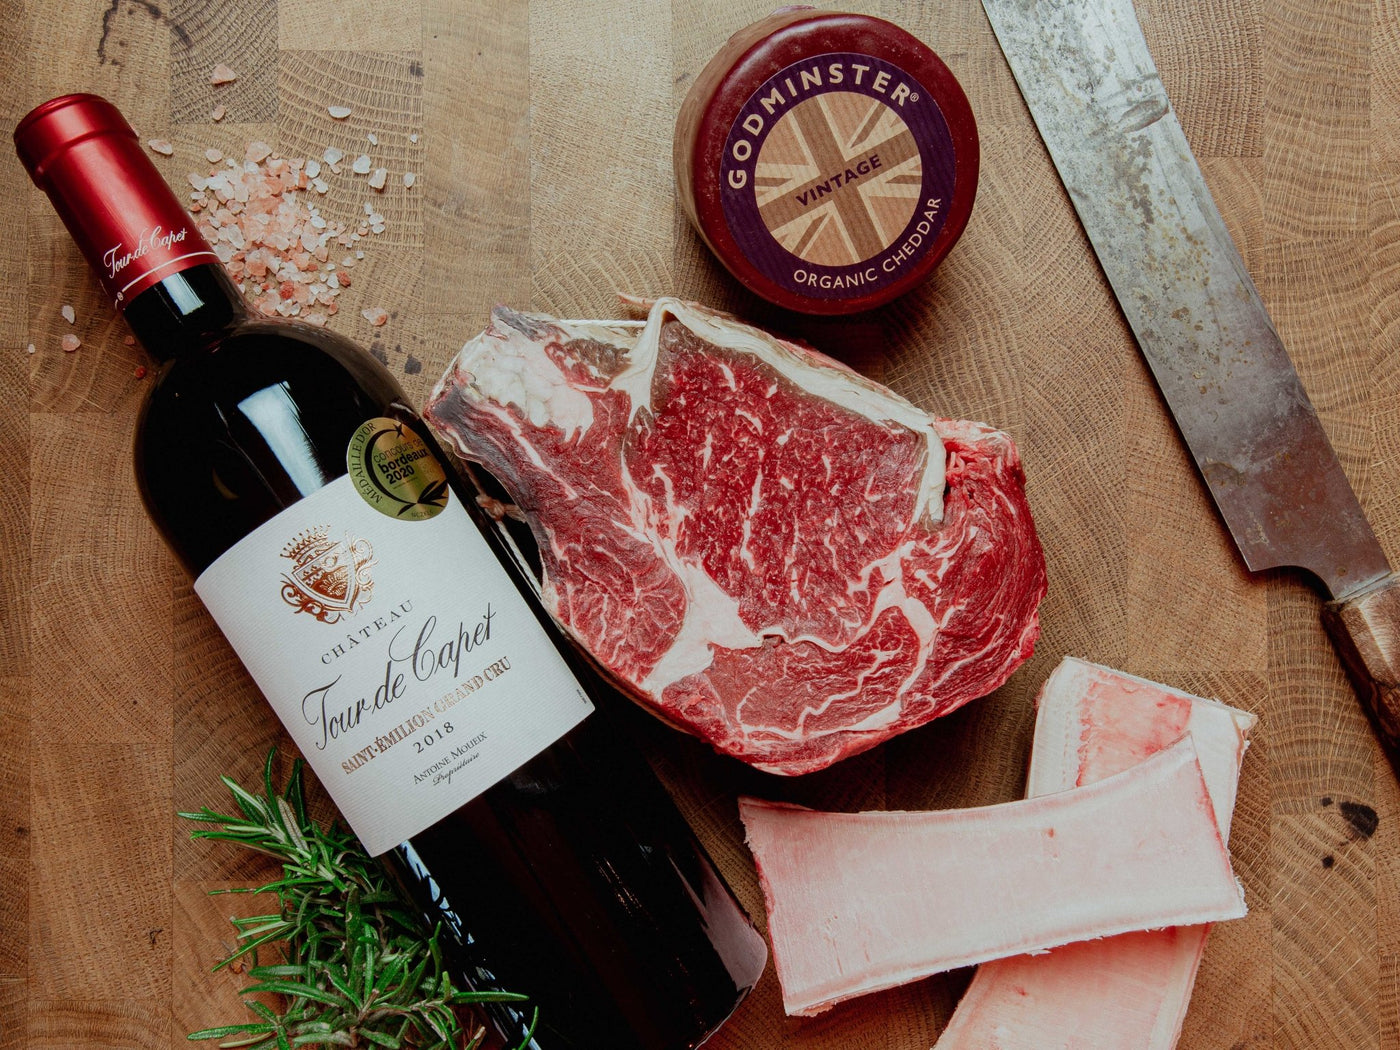 45 Day Dry-Aged Cote De Boeuf Valentine's Day Box - Thomas Joseph Butchery - Ethical Dry-Aged Meat The Best Steak UK Thomas Joseph Butchery